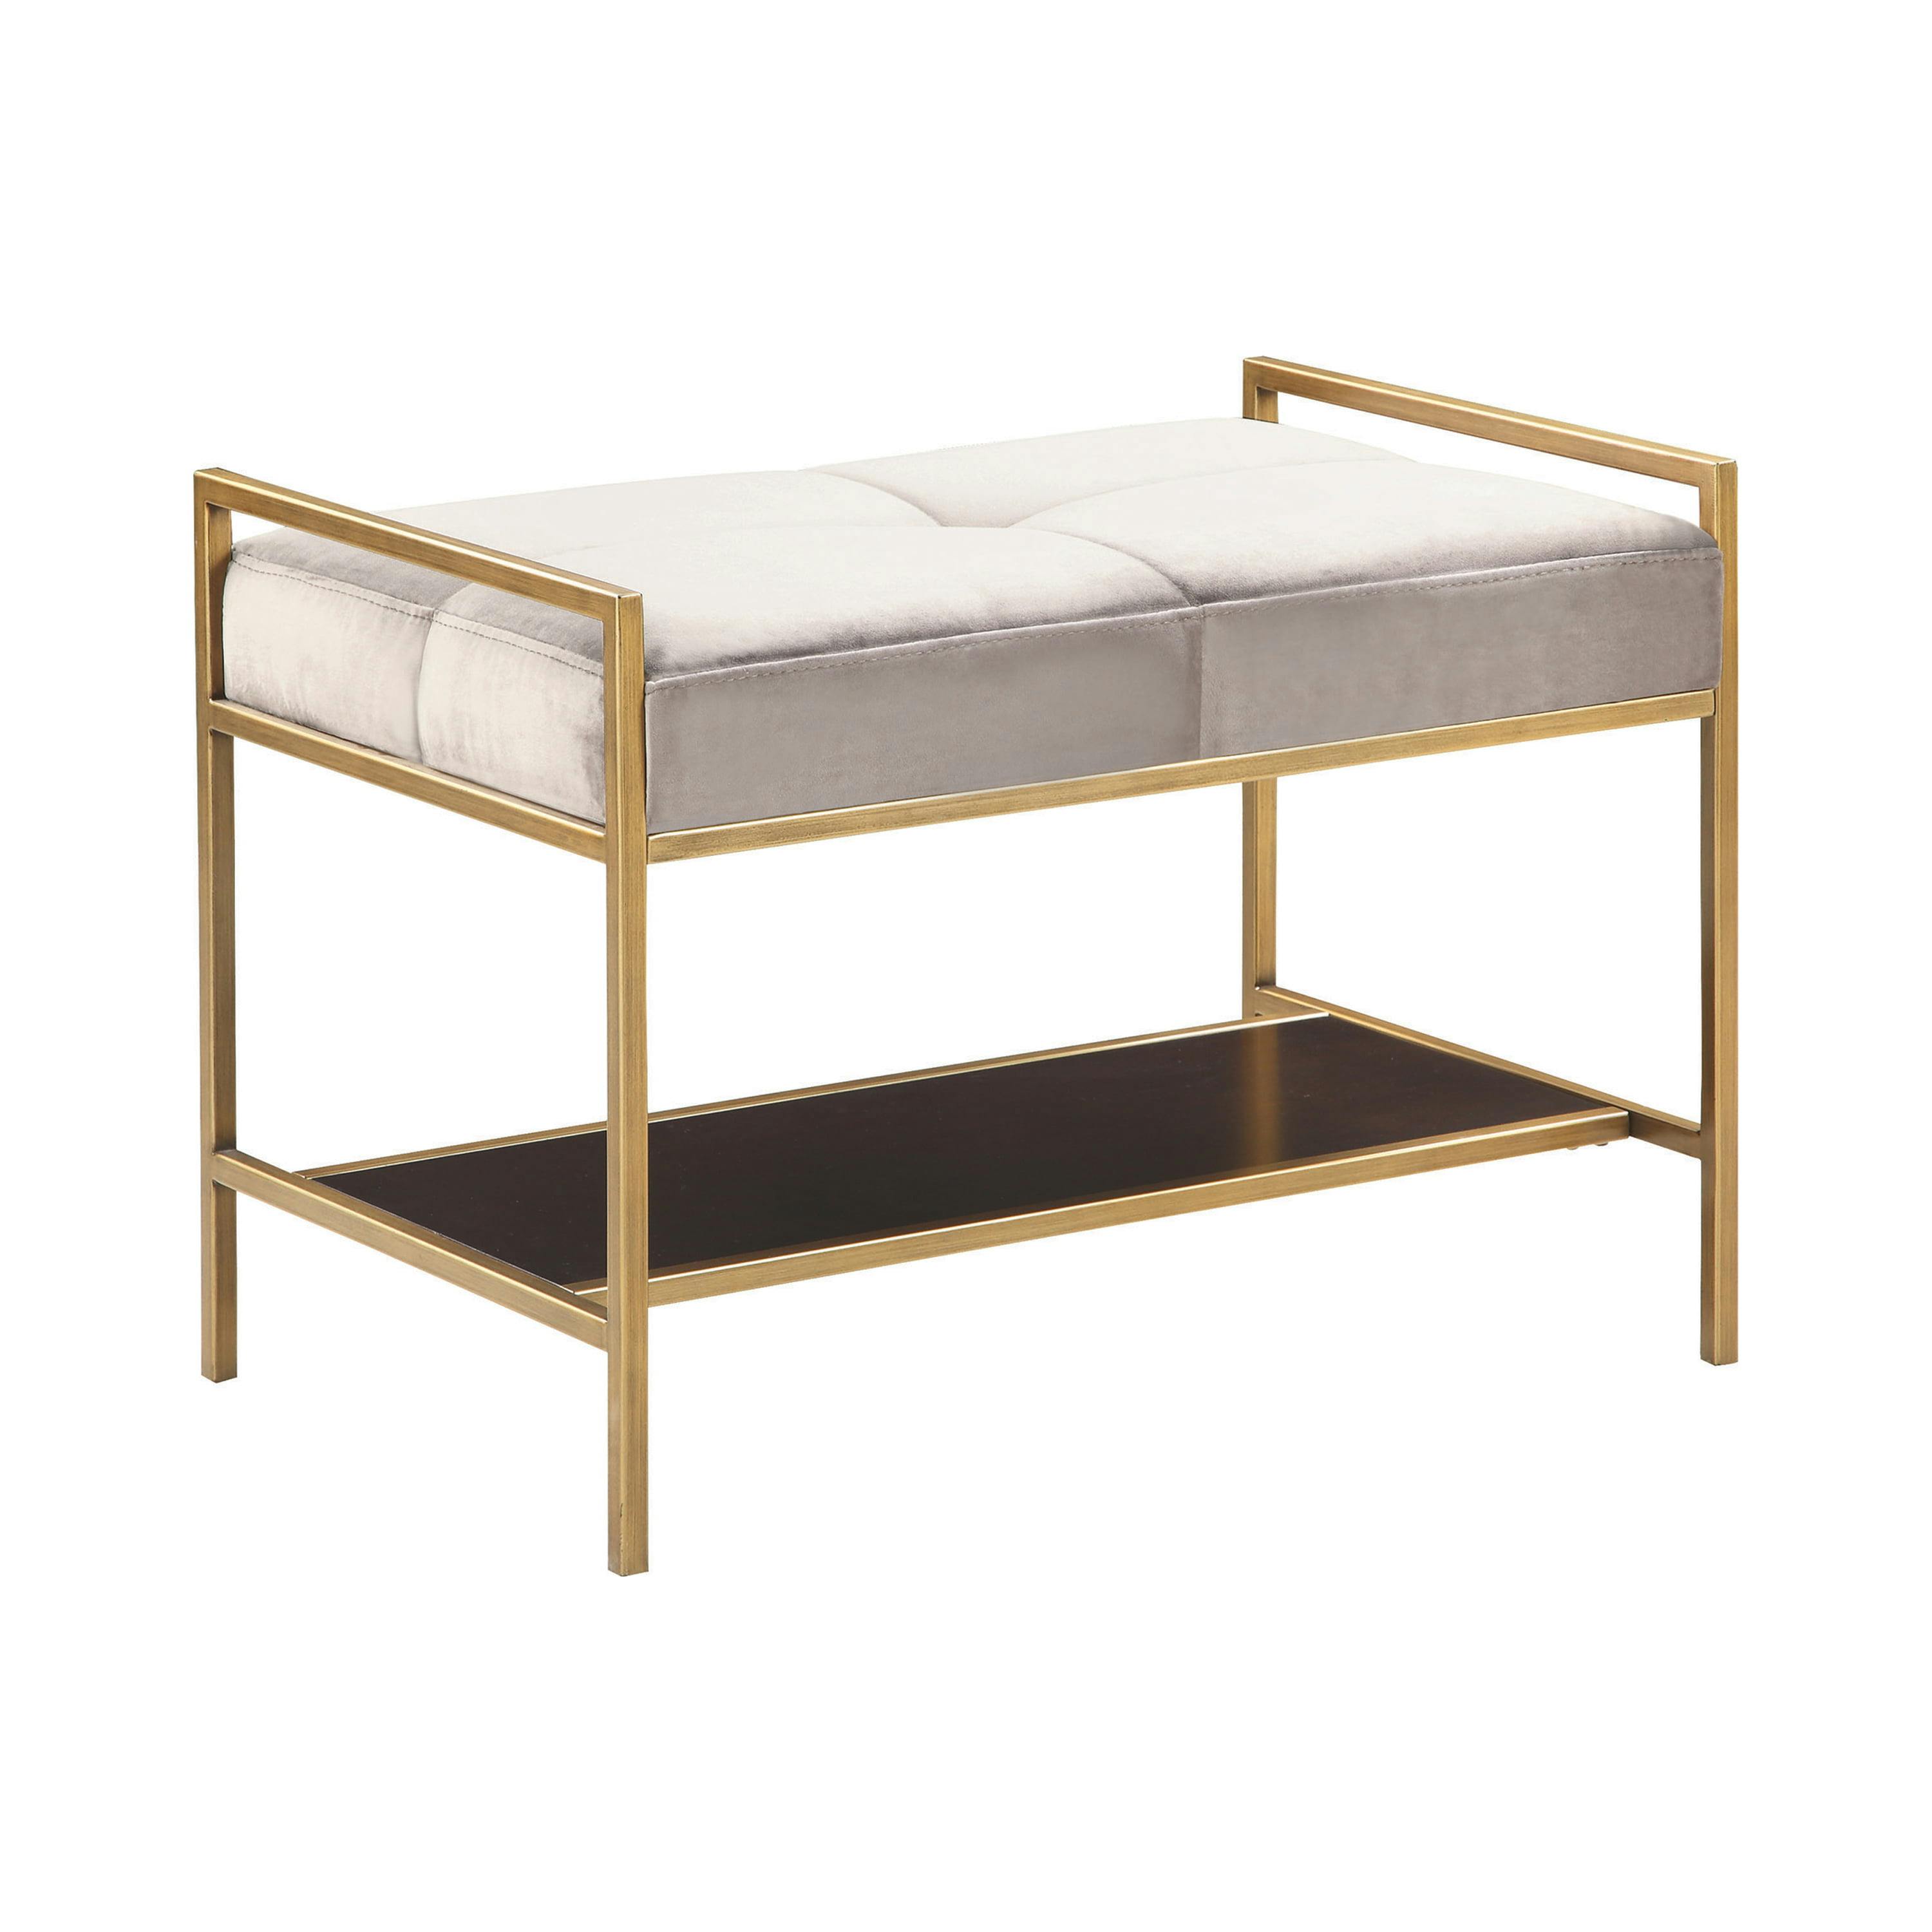 Luxurious Gray Velvet and Gold Metal Bedroom Bench with Storage Shelf